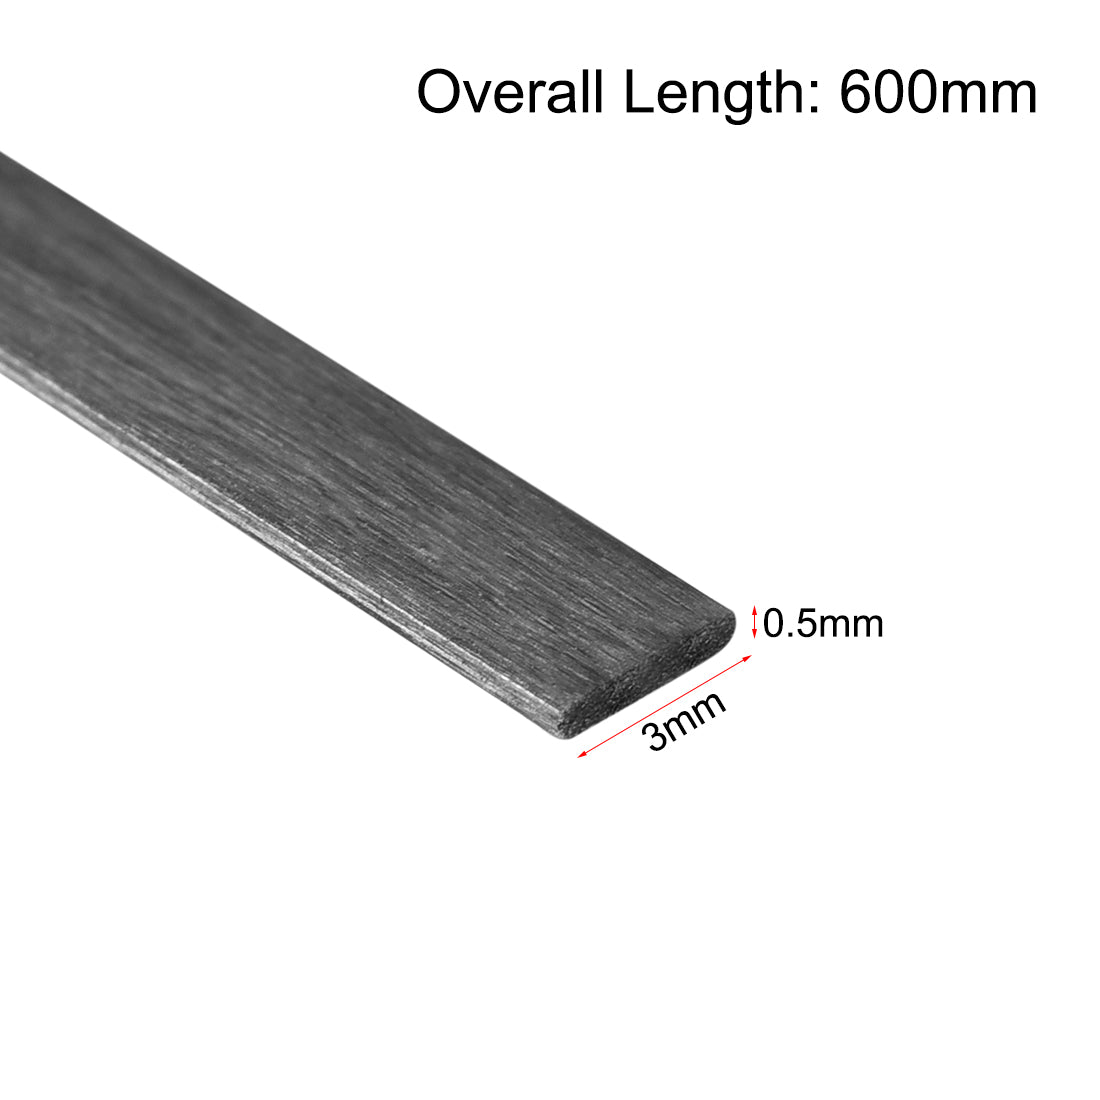 uxcell Uxcell Carbon Fiber Strip Bars 0.5x3mm 600mm Length Pultruded Carbon Fiber Strips for Kites, RC Airplane 2 Pcs